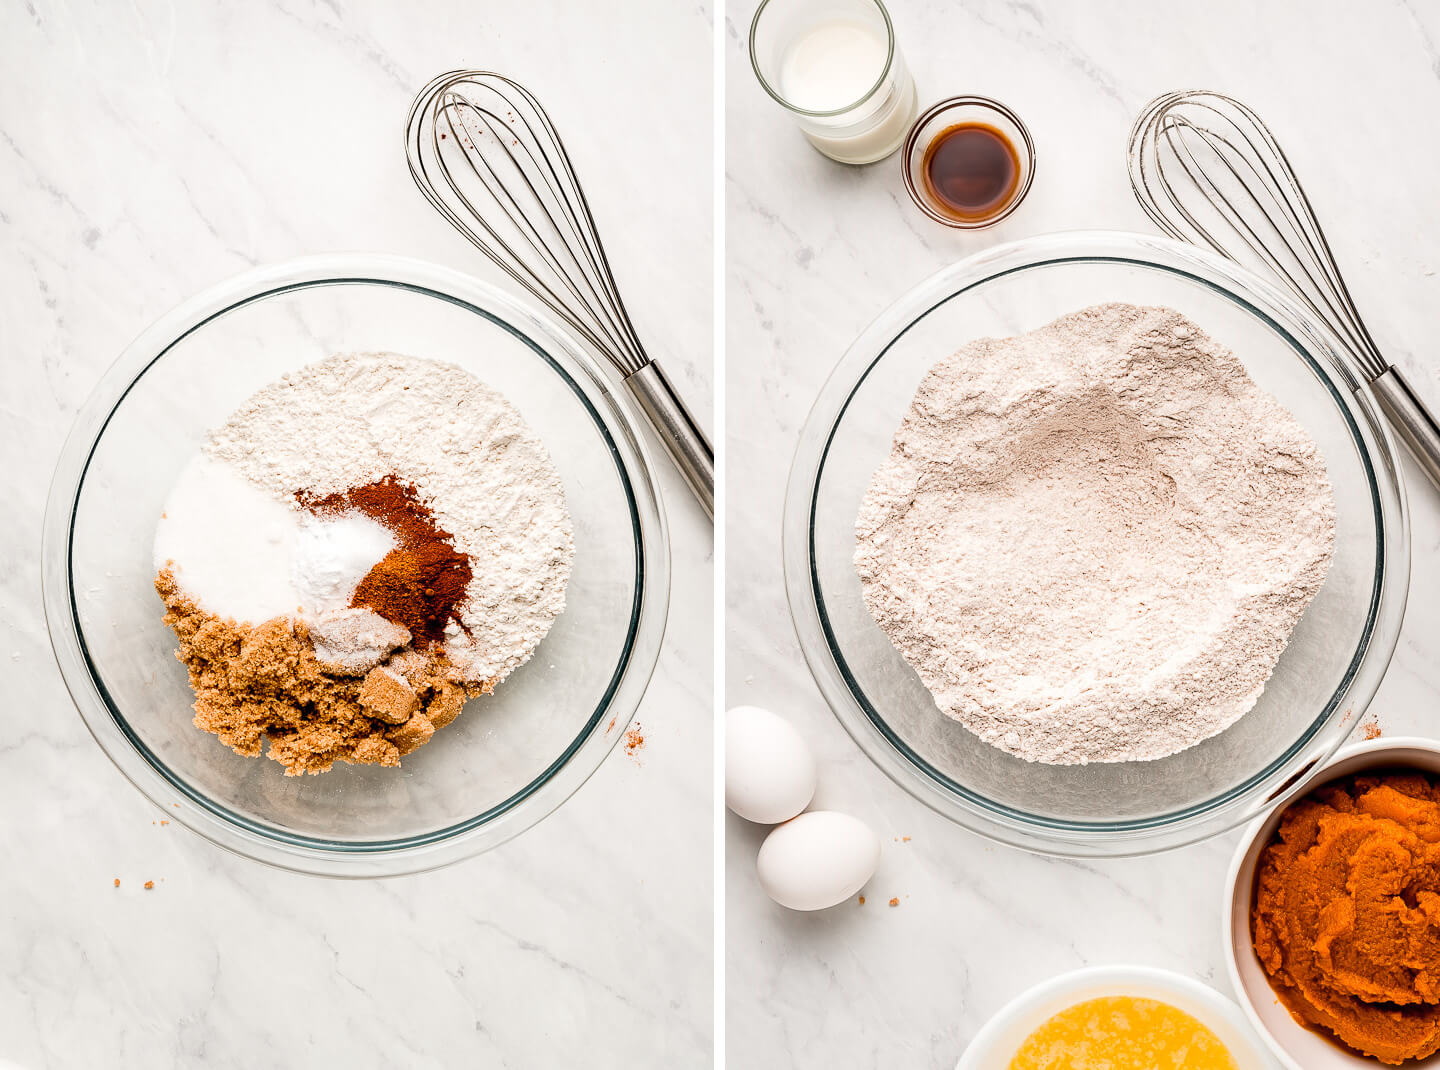 Diptych-flour, sugars, and cinnamon in a bowl; mixed together with other ingredients in dishes surrounding.